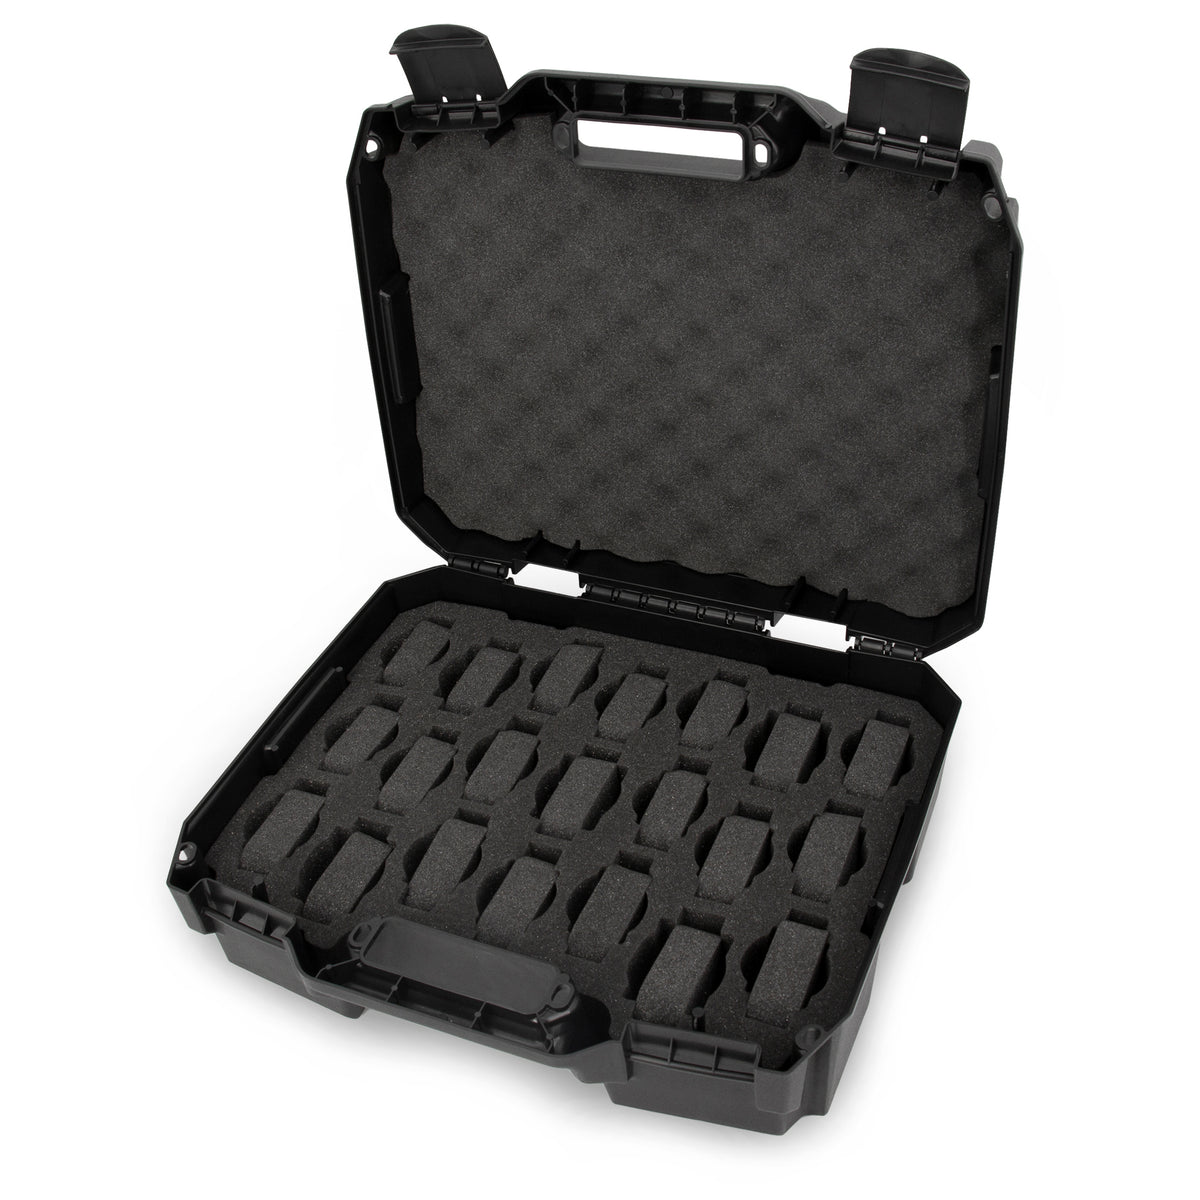 CASEMATIX Watch Travel Case for Two Watches with Hard Shell